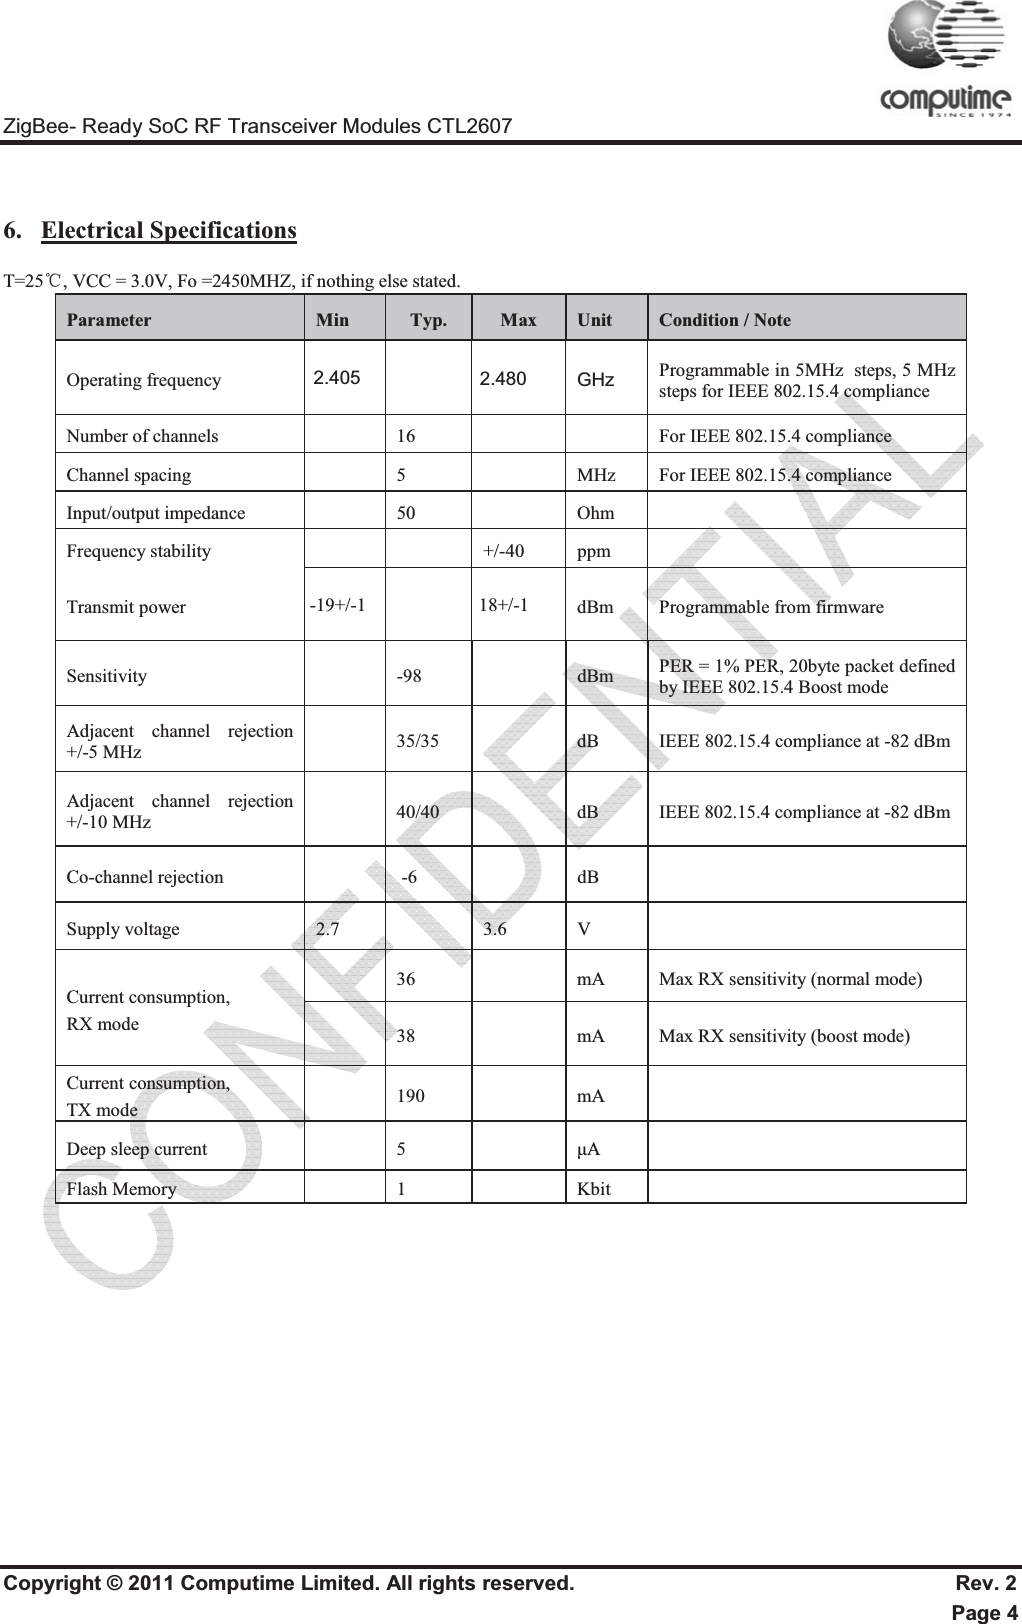 ZigBee- Ready SoC RF Transceiver Modules CTL2607 Copyright © 2011 Computime Limited. All rights reserved.                                                       Rev. 2 Page 4 6. Electrical SpecificationsT=25ć, VCC = 3.0V, Fo =2450MHZ, if nothing else stated. Parameter   Min   Typ.   Max   Unit   Condition / Note  Operating frequency   2.4   2.5   GHz  Programmable in 5MHz  steps, 5 MHz steps for IEEE 802.15.4 compliance  Number of channels     16       For IEEE 802.15.4 compliance  Channel spacing     5     MHz   For IEEE 802.15.4 compliance  Input/output impedance     50     Ohm    Frequency stability       +/-40   ppm    Transmit power   -17    20  dBm   Programmable from firmware  Sensitivity     -98    dBm   PER = 1% PER, 20byte packet defined by IEEE 802.15.4 Boost mode Adjacent channel rejection  +/-5 MHz     35/35    dB   IEEE 802.15.4 compliance at -82 dBmAdjacent channel rejection +/-10 MHz     40/40     dB   IEEE 802.15.4 compliance at -82 dBmCo-channel rejection     -6  dB   Supply voltage   2.7     3.6   V    Current consumption,  RX mode   36    mA   Max RX sensitivity (normal mode)    38    mA   Max RX sensitivity (boost mode) Current consumption, TX mode  190   mA  Deep sleep current    5    ȝA Flash Memory    1    Kbit   2.405 2.480-19+/-1 18+/-1